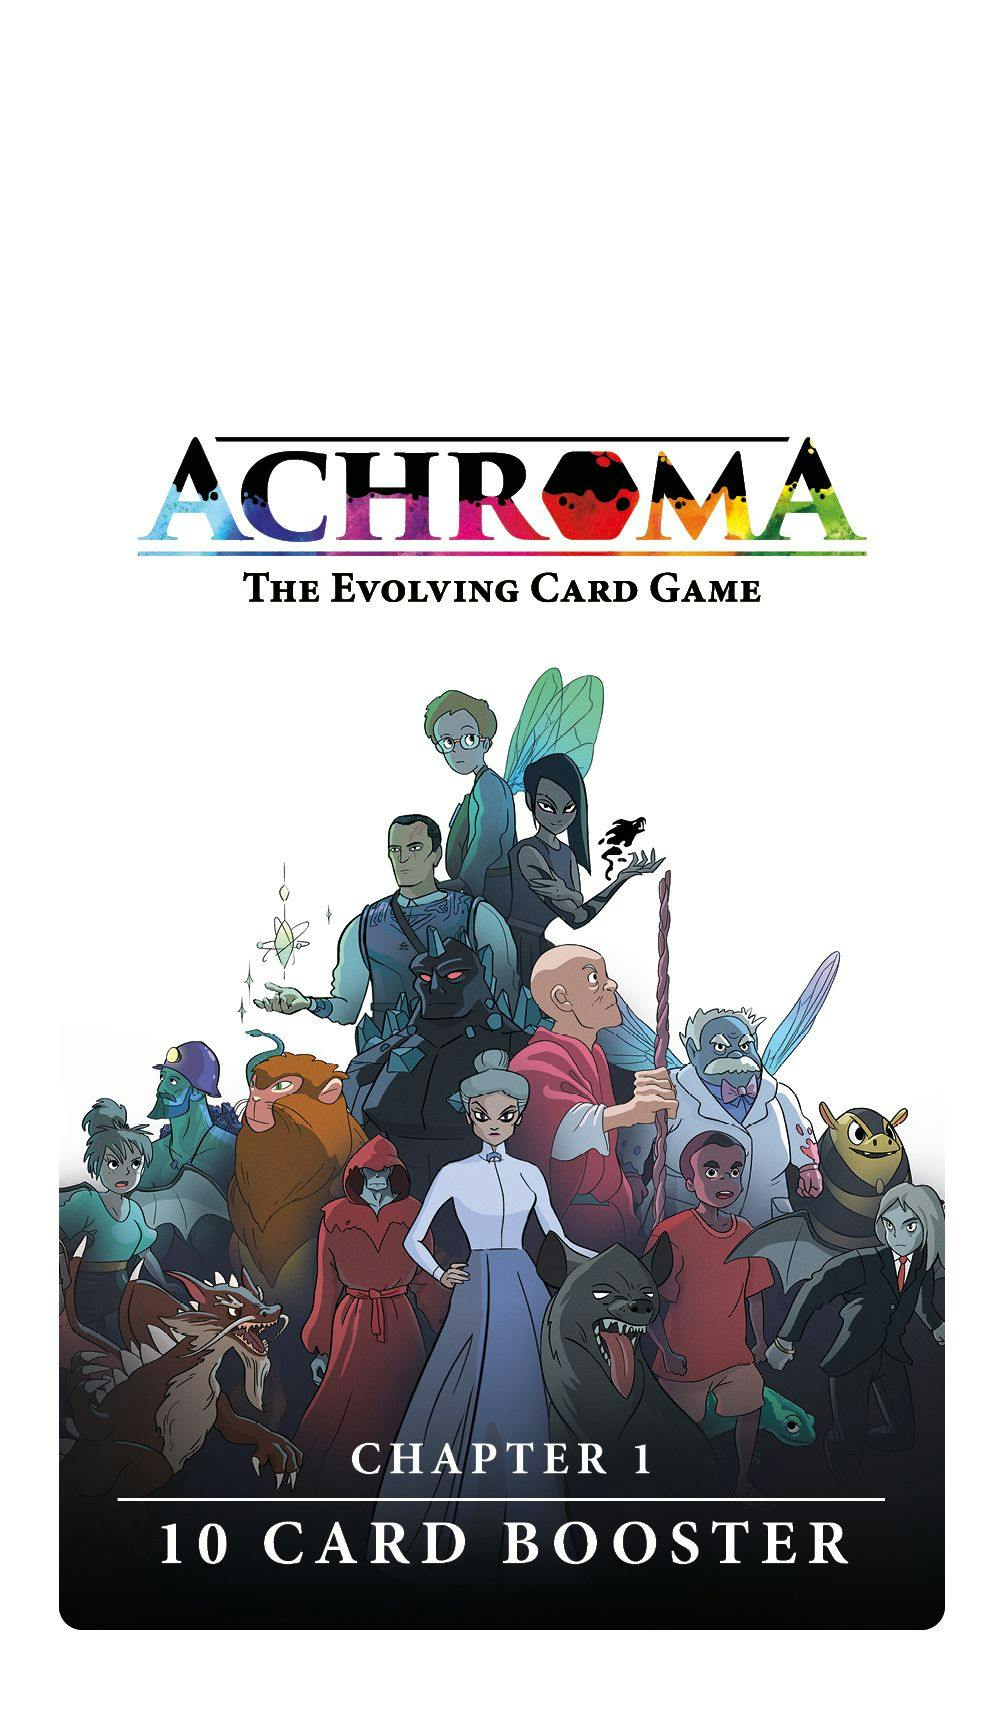 Achroma Chapter 1 Boosters Front Printing template 100ml _85 x 145 mm_.jpg